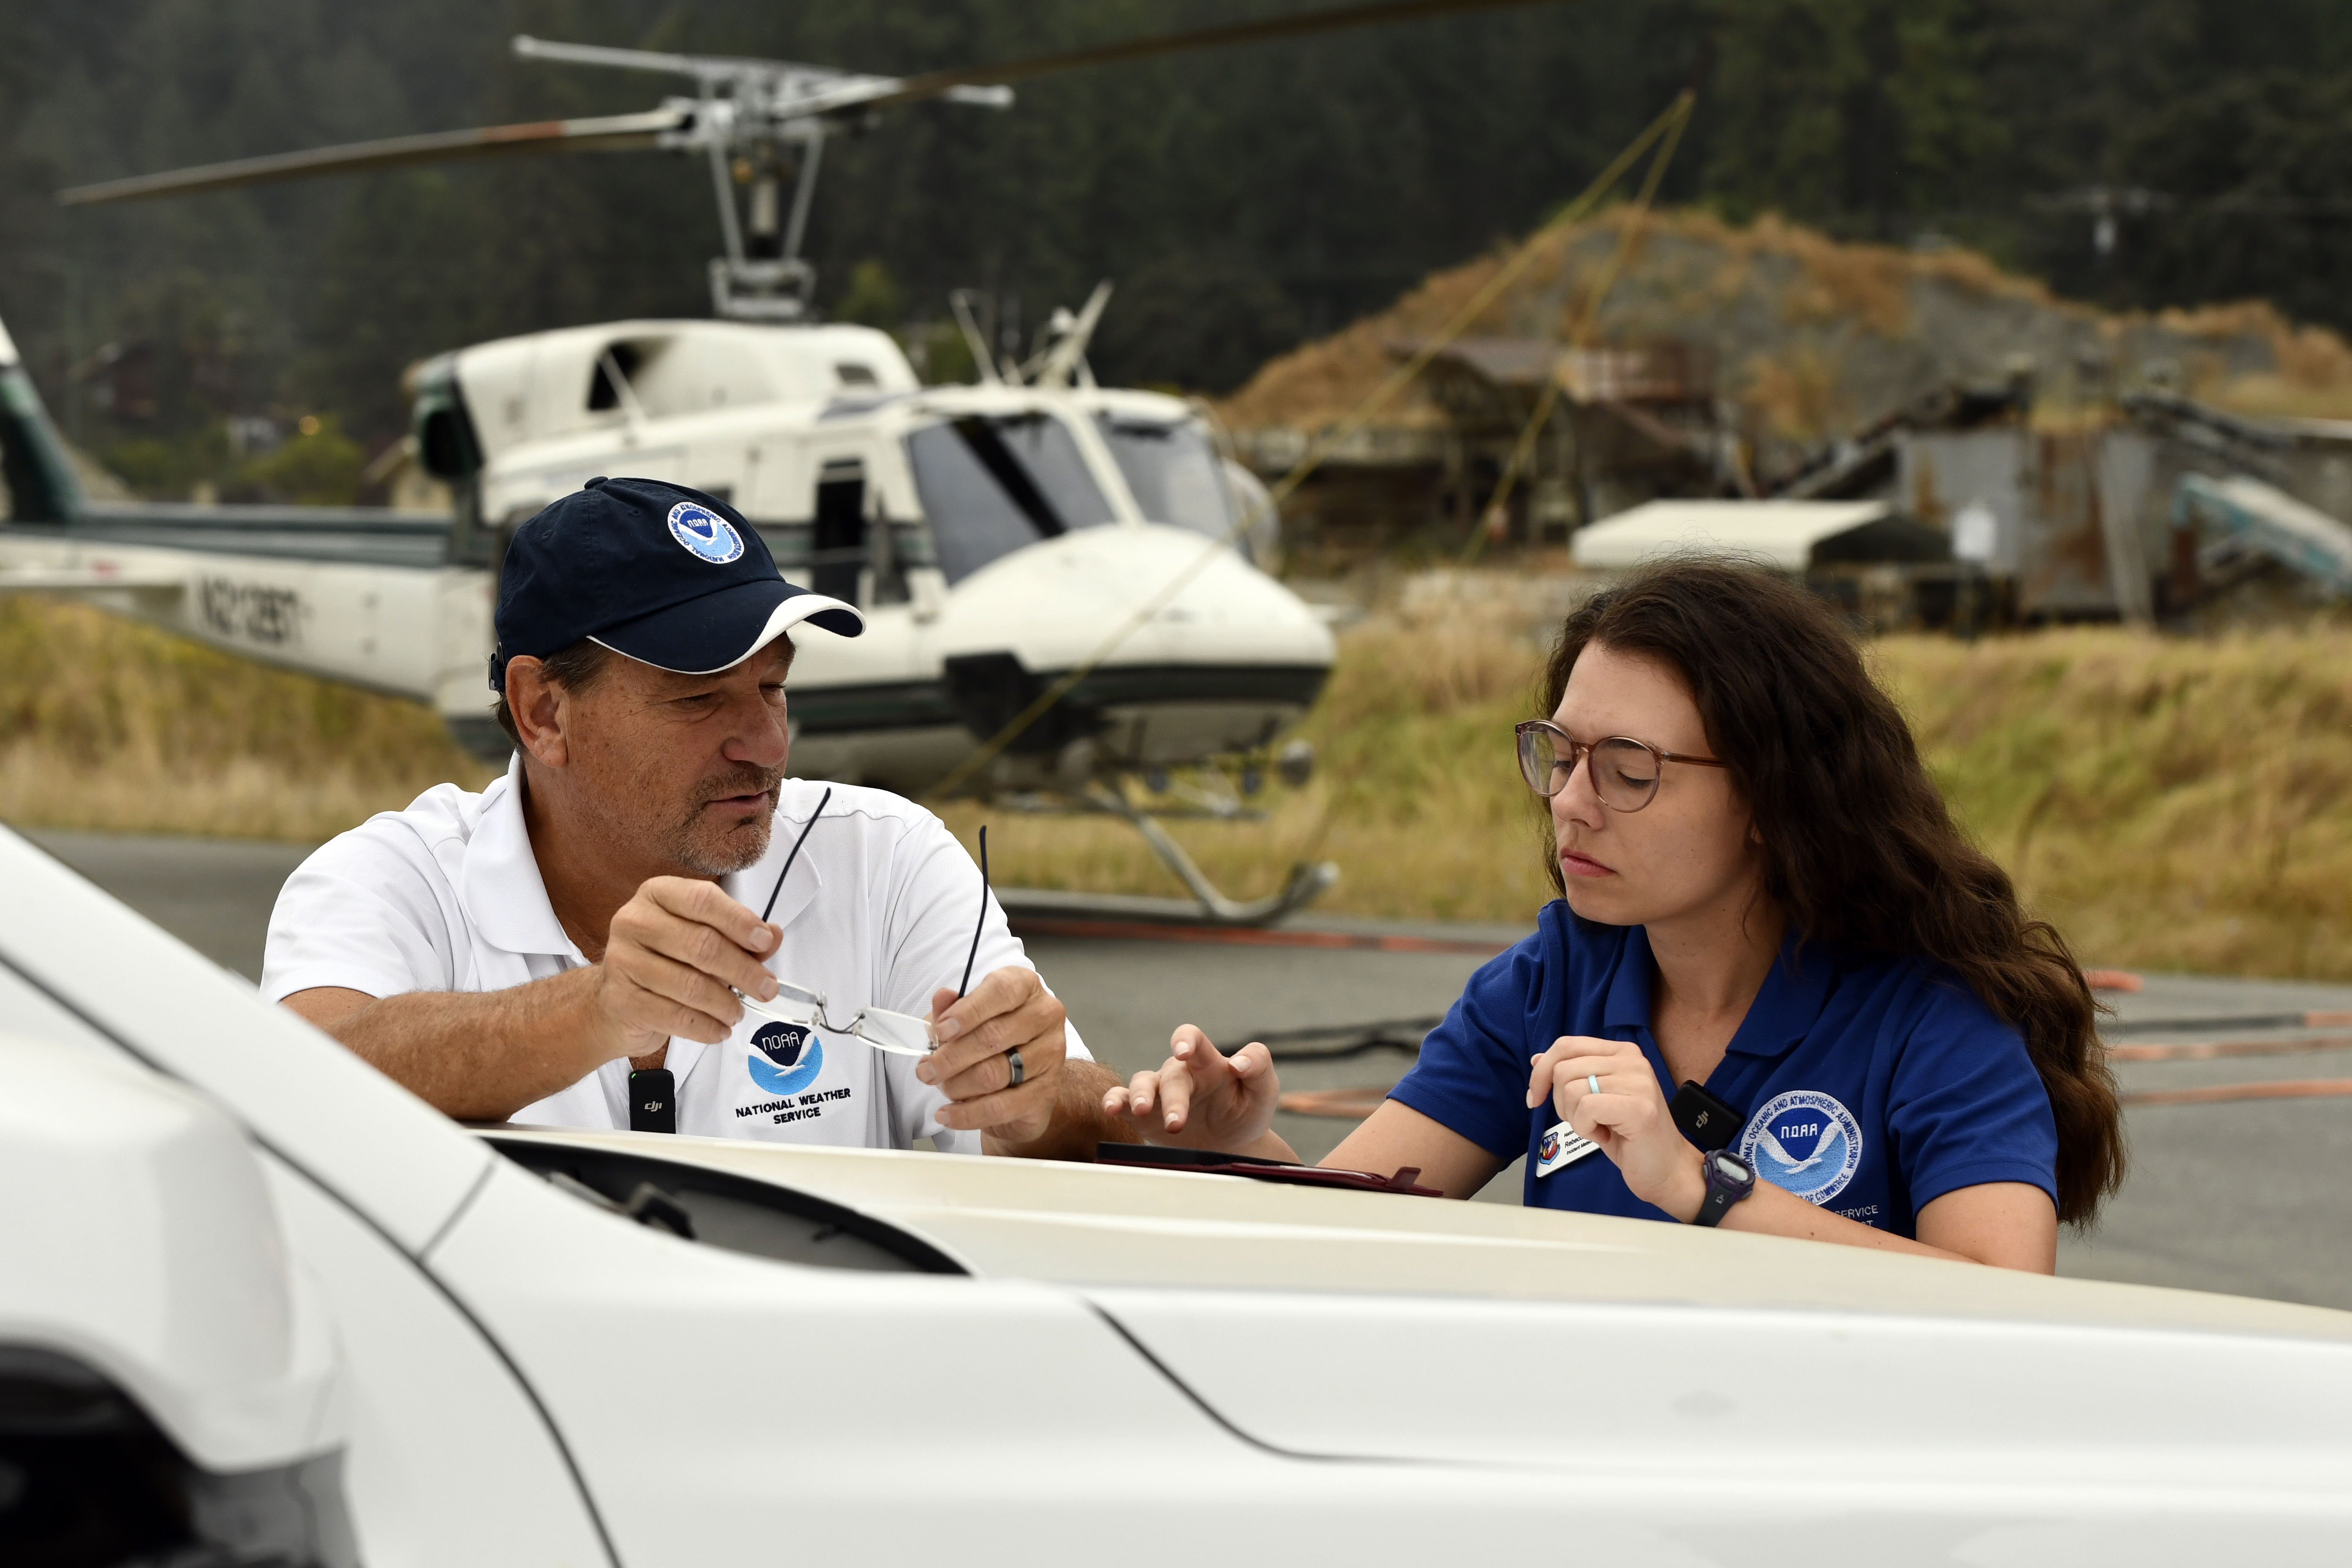 IMET Jeff Tonkin and IMET trainee Rebecca Muessle discussing their aviation forecast and briefing at the helibase of the Six Rivers Lightning Fire on August 22, 2022.